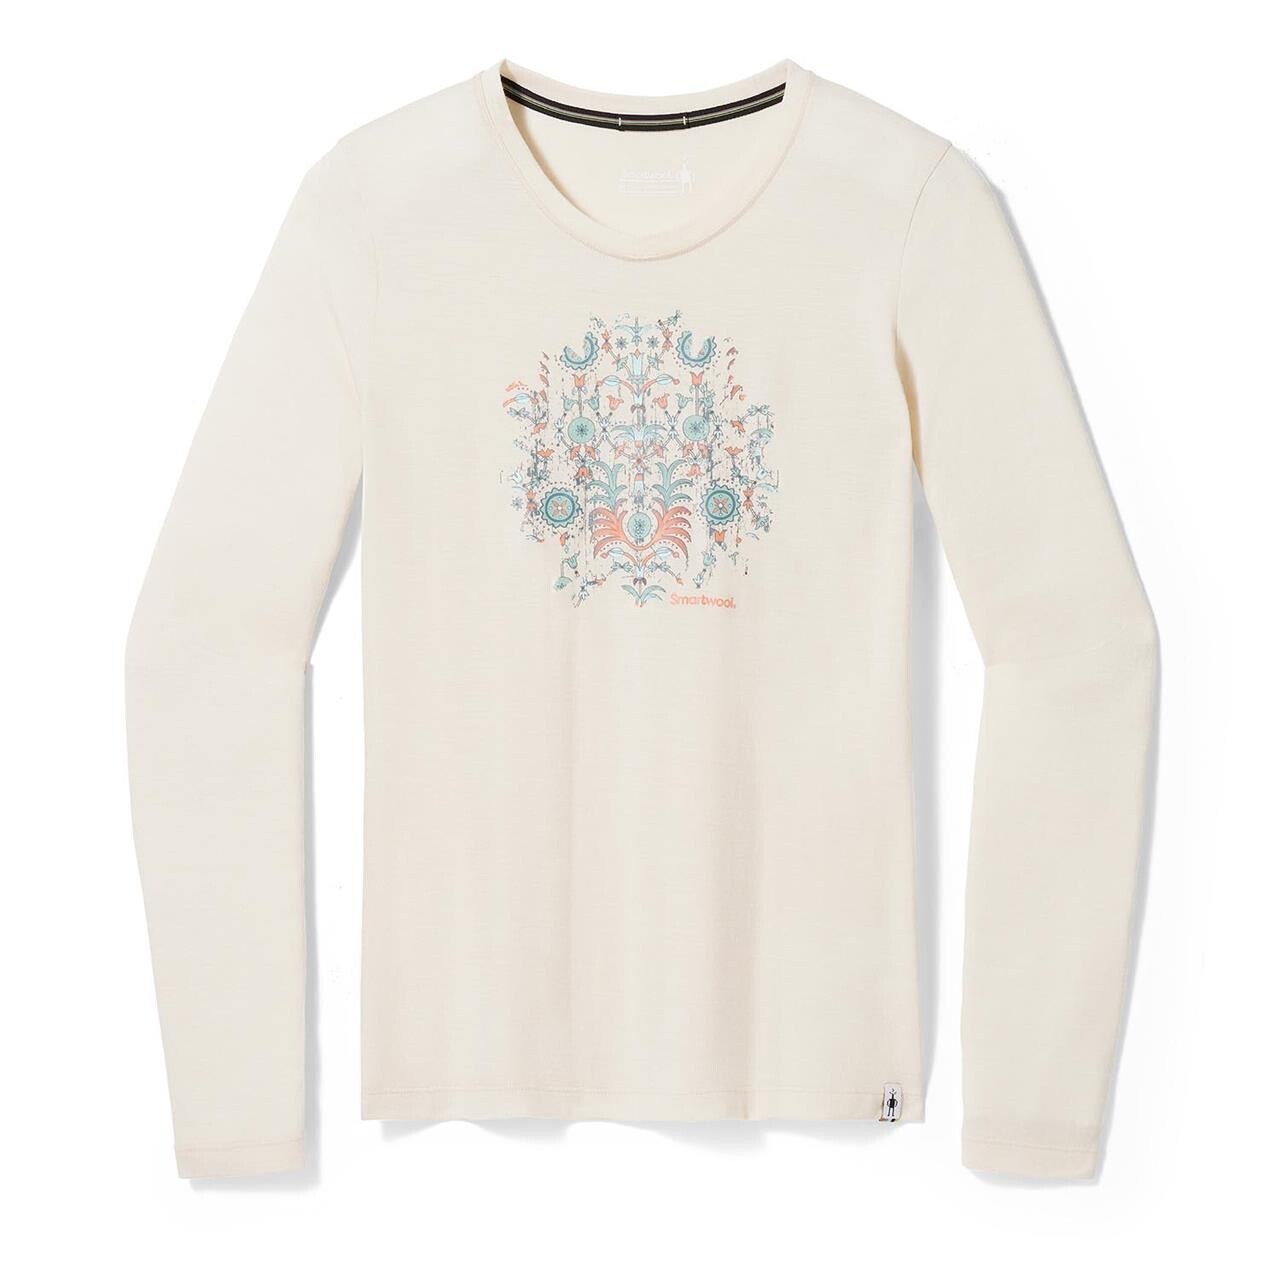 Se Smartwool Womens Floral Tundra Graphic L/S Tee (Beige (ALMOND HEATHER) Small) hos Friluftsland.dk